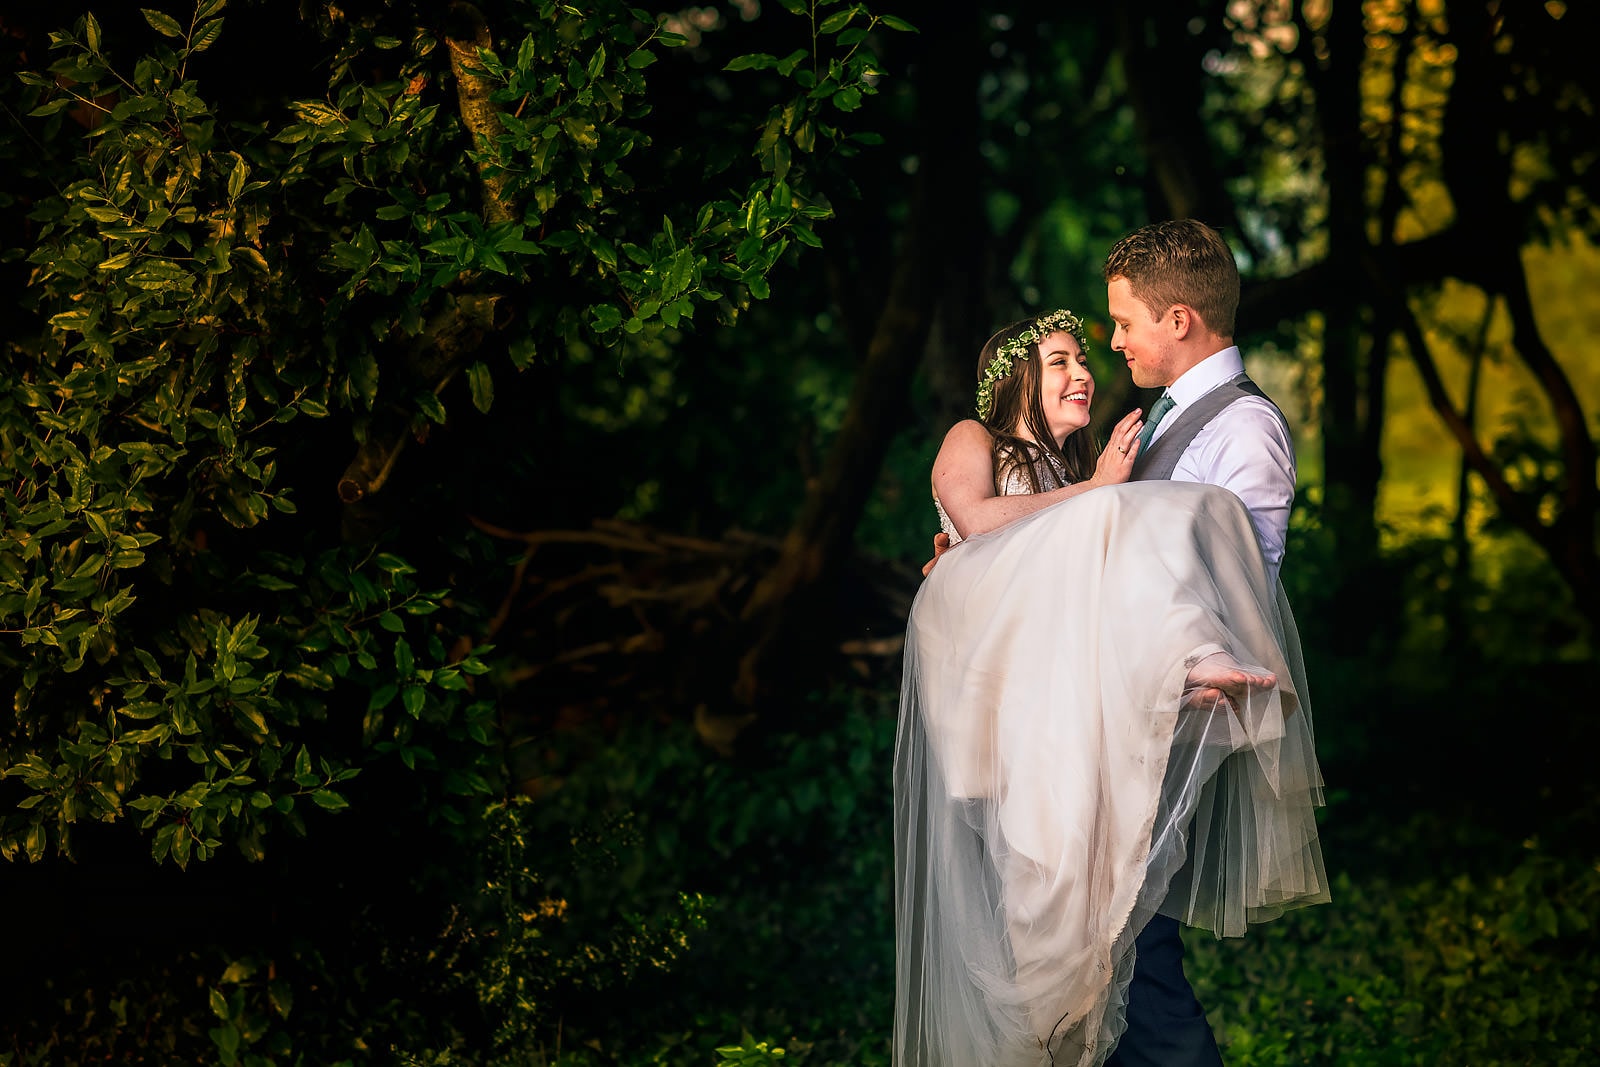 Newly weds sharing a lovely moment at their Cotswolds wedding